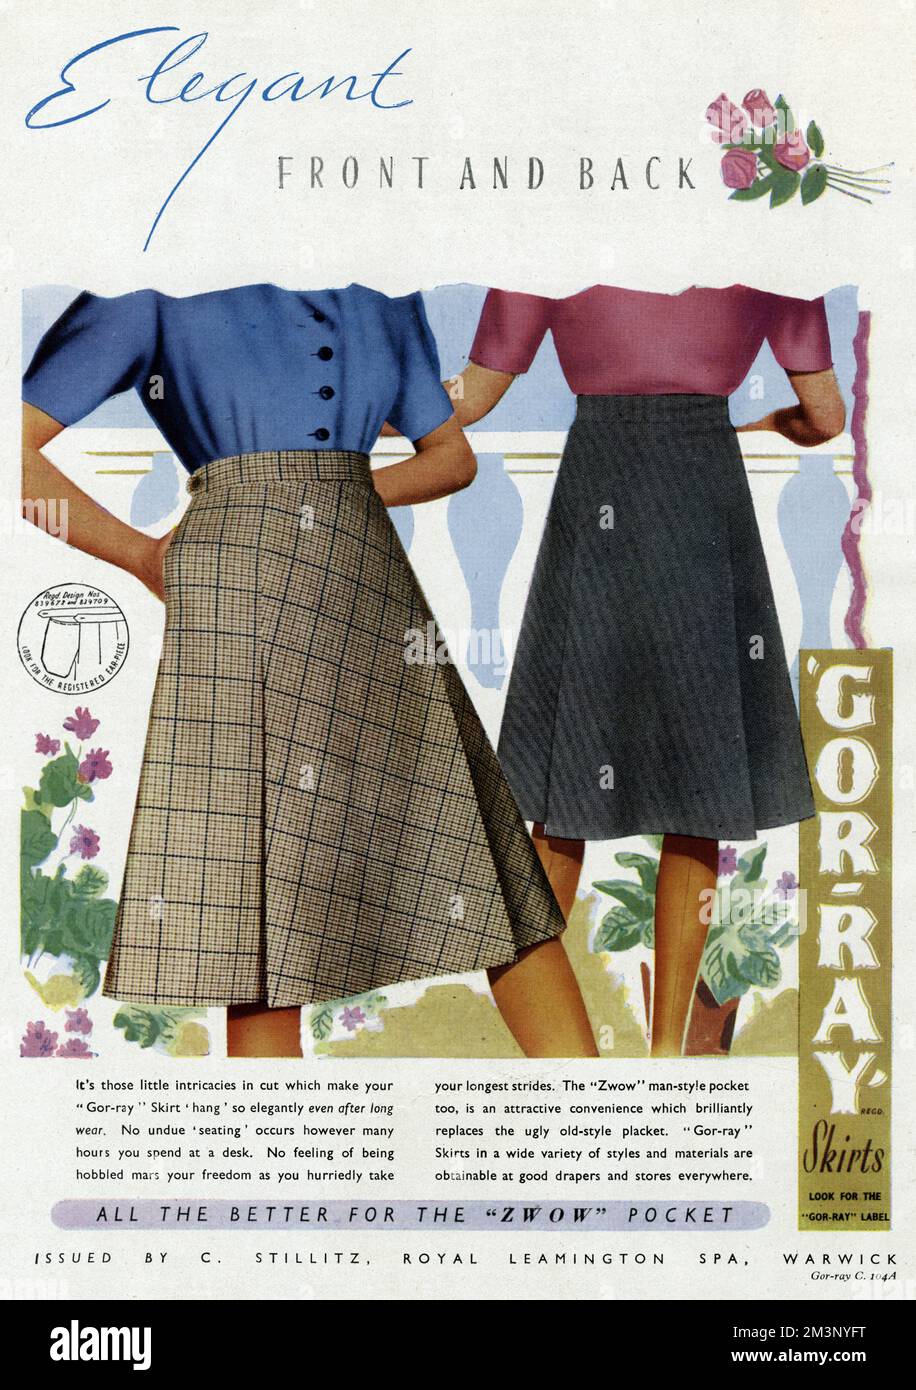 'Elegant front and back'.  It's those little intricacies in cut which make your 'Gor-ray' skirt hang so elegantly even after long wear.  No undue 'seating' occurs however many hours you spend at a deck.  No feeling of being hobbled mars your freedom as you hurriedly take your longest strides.  1945 Stock Photo